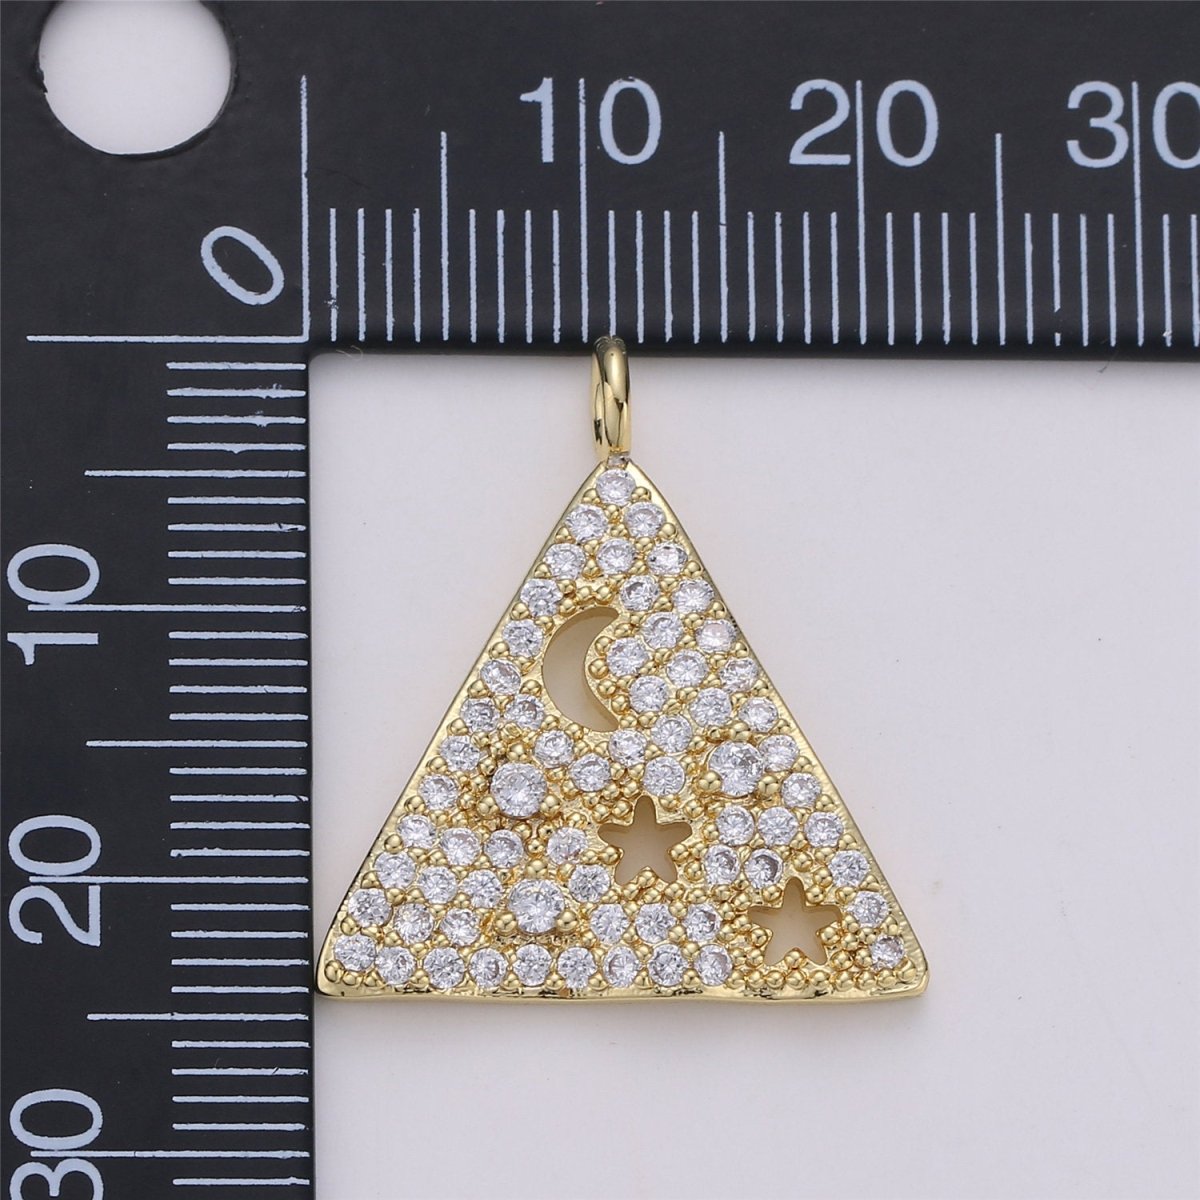 24K Gold Filled Geometric Dainty Triangle Charm with Micro Pave Moon and Star Cubic Zirconia CZ Stone for Necklace Bracelet Component, C-872 - DLUXCA